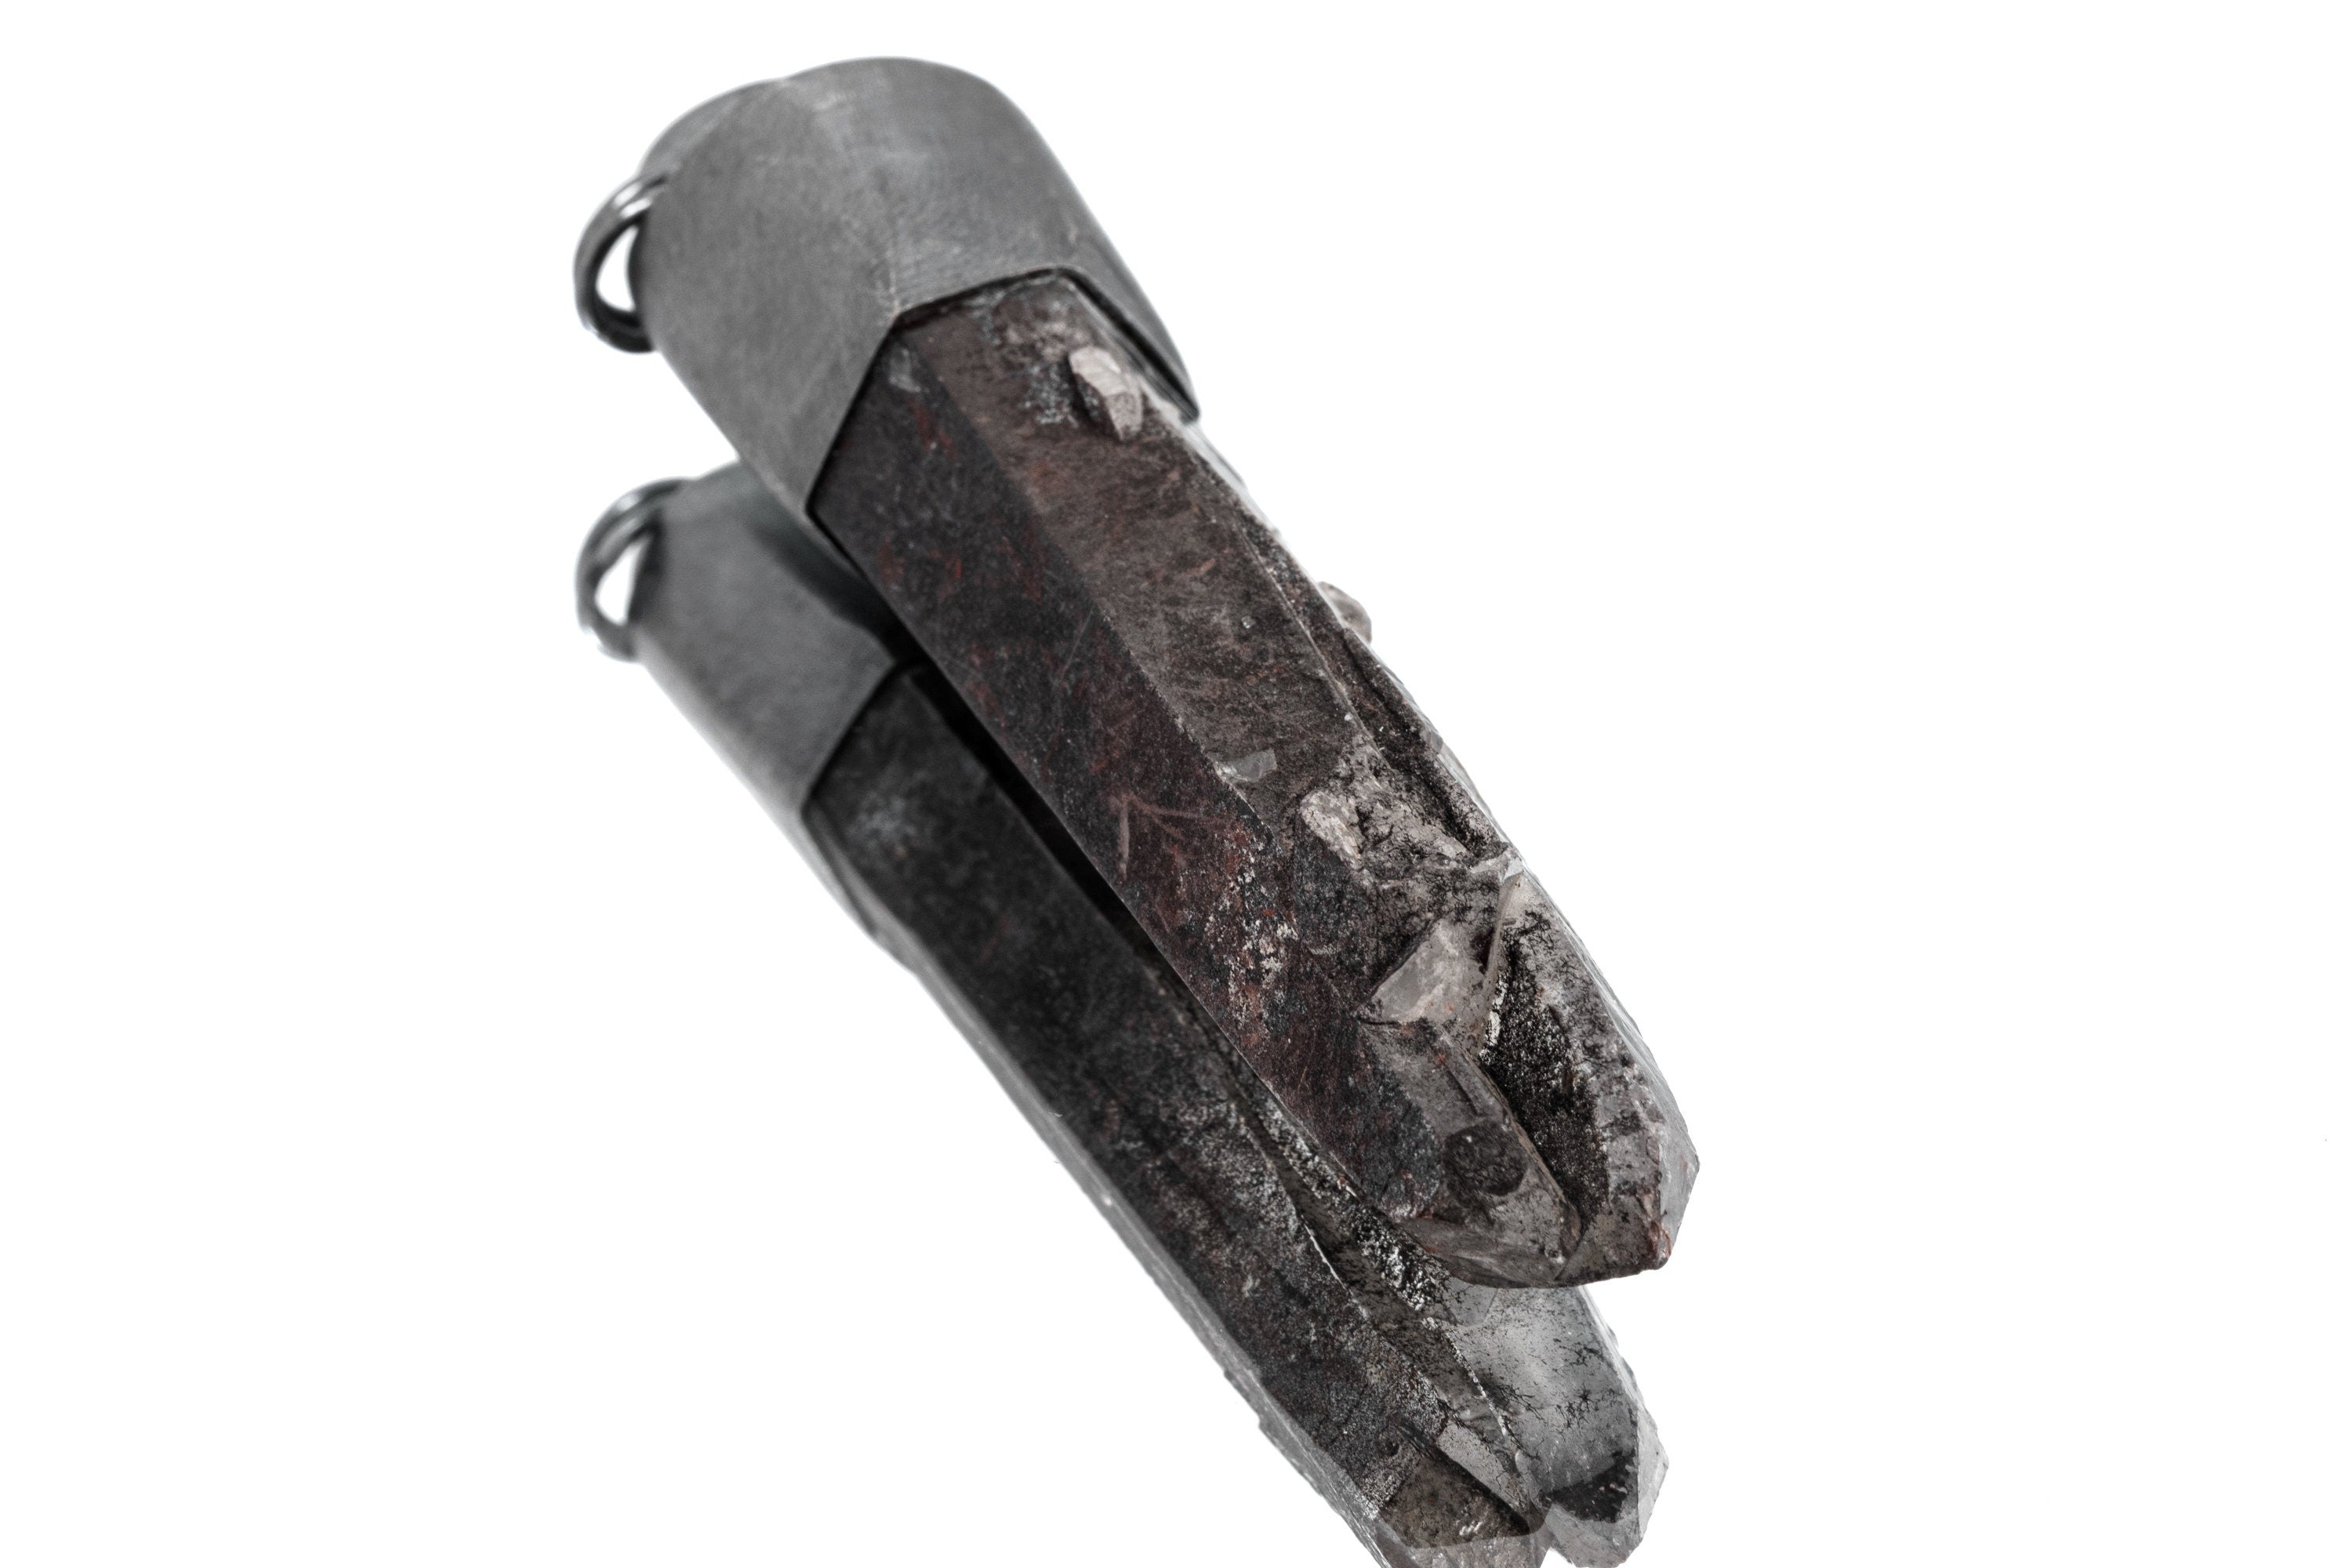 Oxidized Sterling Silver Pendant with Large Smoky Quartz Point, Whispering Shadows, Brush Textured Brutalist Industrial Look, Bold Jewelry